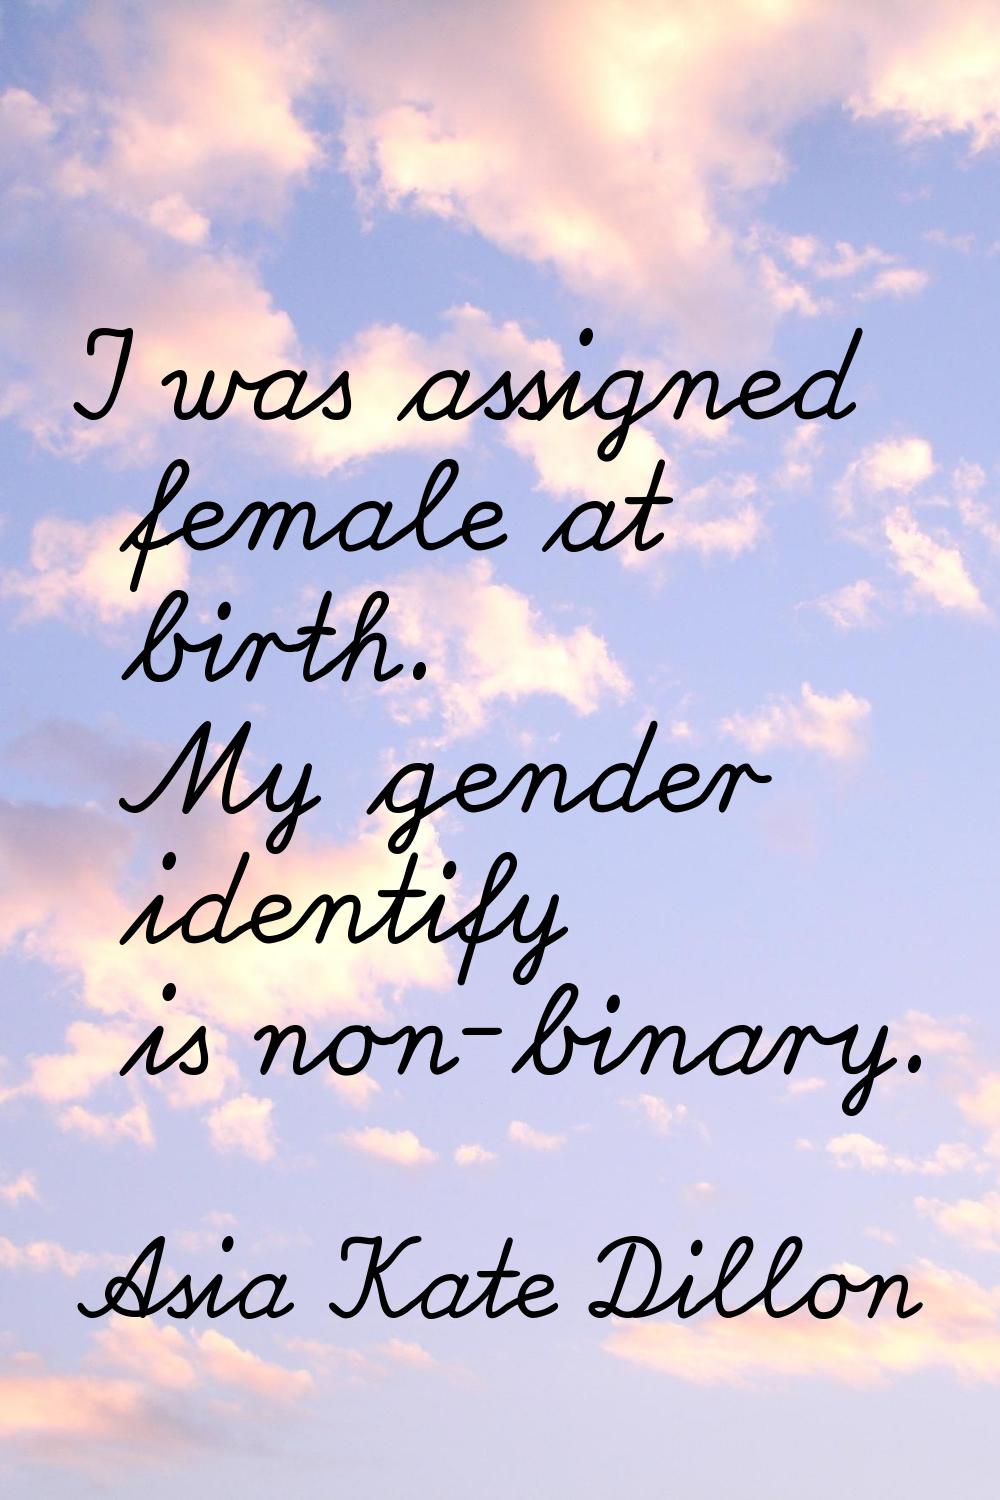 I was assigned female at birth. My gender identify is non-binary.